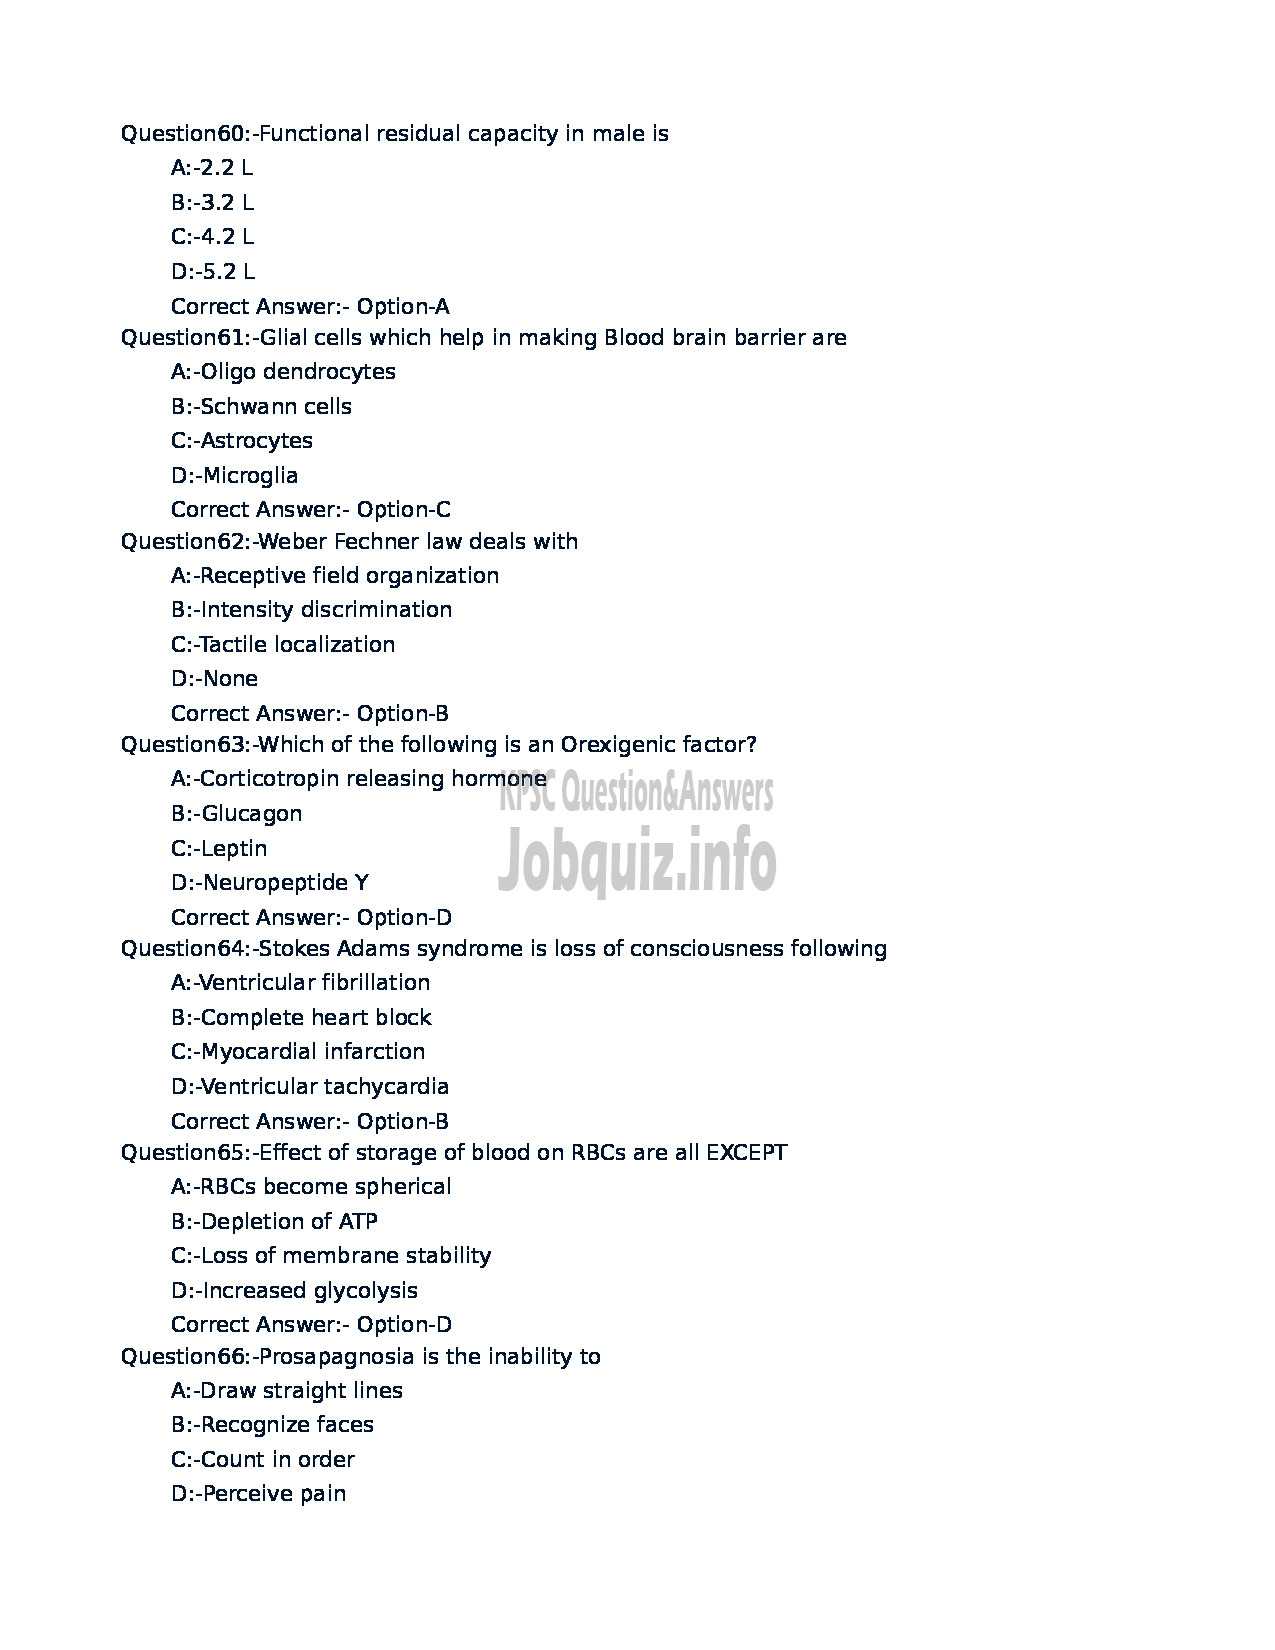 Kerala PSC Question Paper - Assistant Professor in Physiology (NCA) Medical Education-10